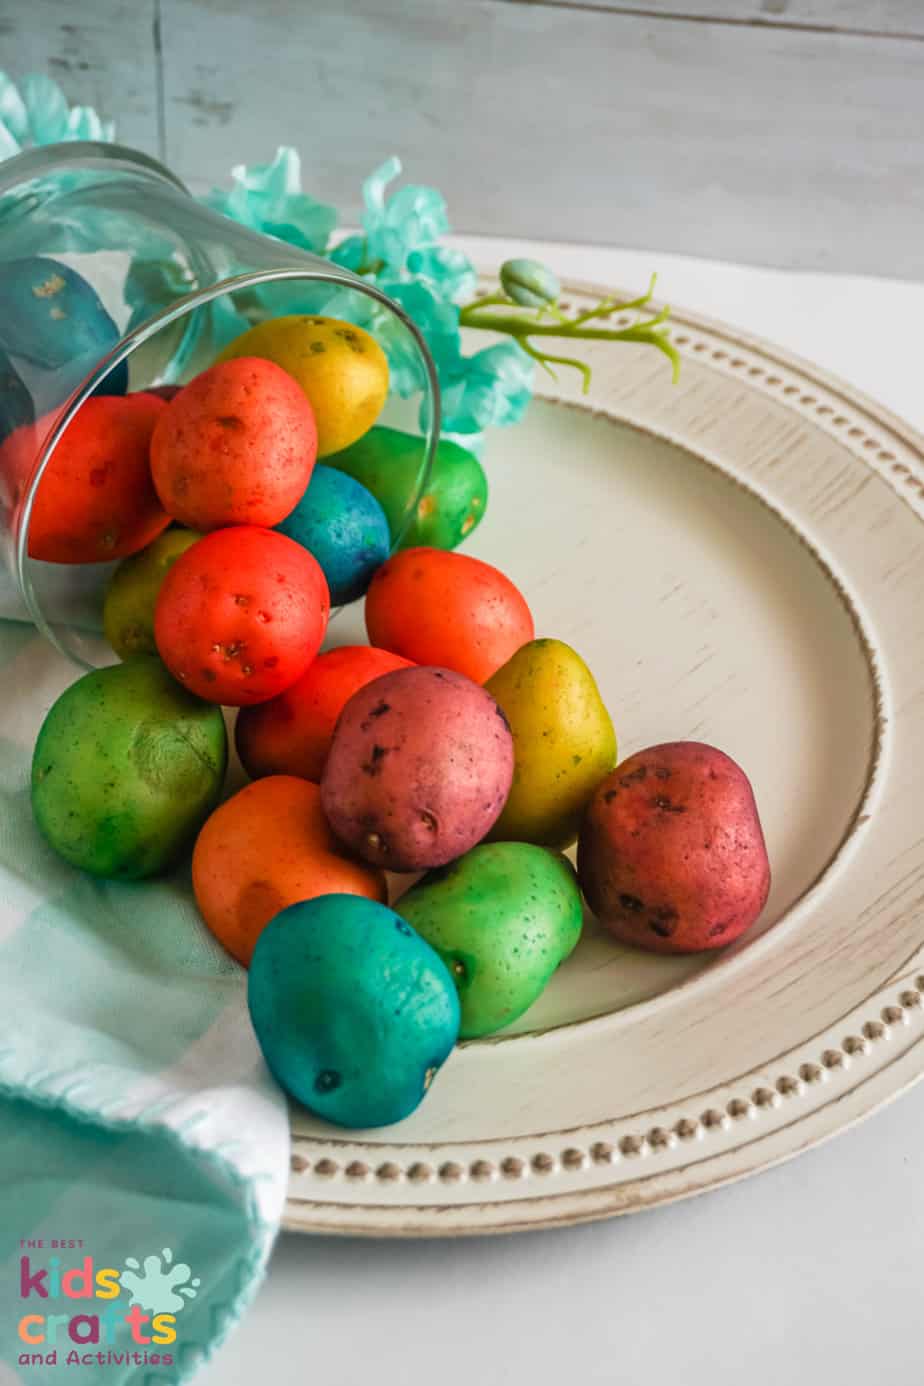 potatoes colored diffeent colors on a plate